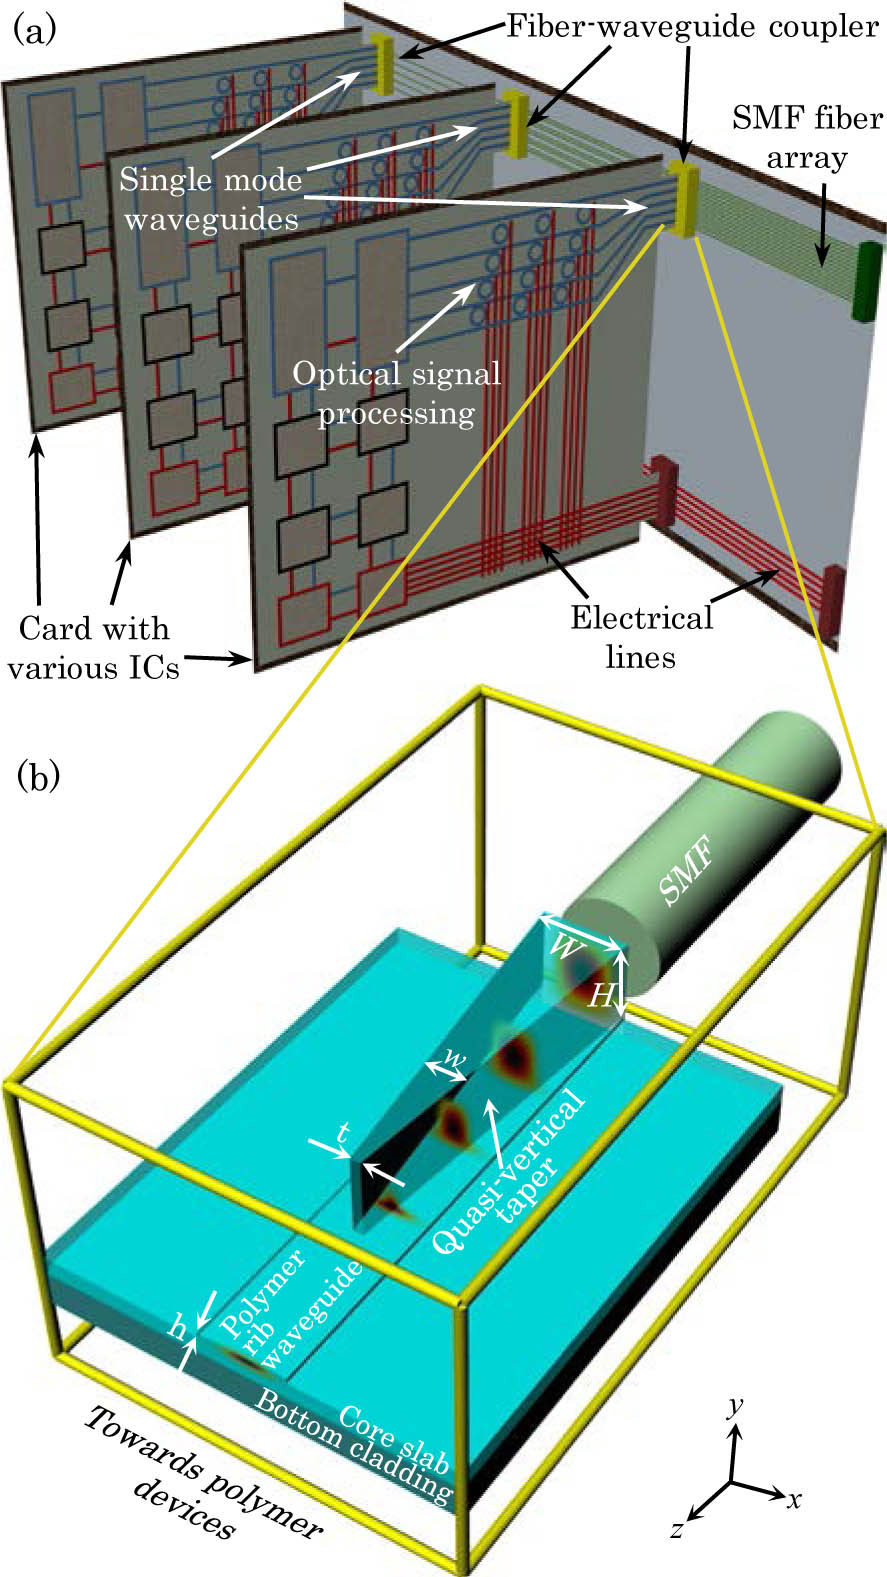 (a) Schematic of an optical backplane. (b) Schematic of a taper-waveguide system for coupling between standard SMFs and single-mode waveguides. In this diagram, the top cladding is transparent in order to clearly show the system structure, the mode propagating inside the quasi-vertical taper, and the polymer rib waveguide.